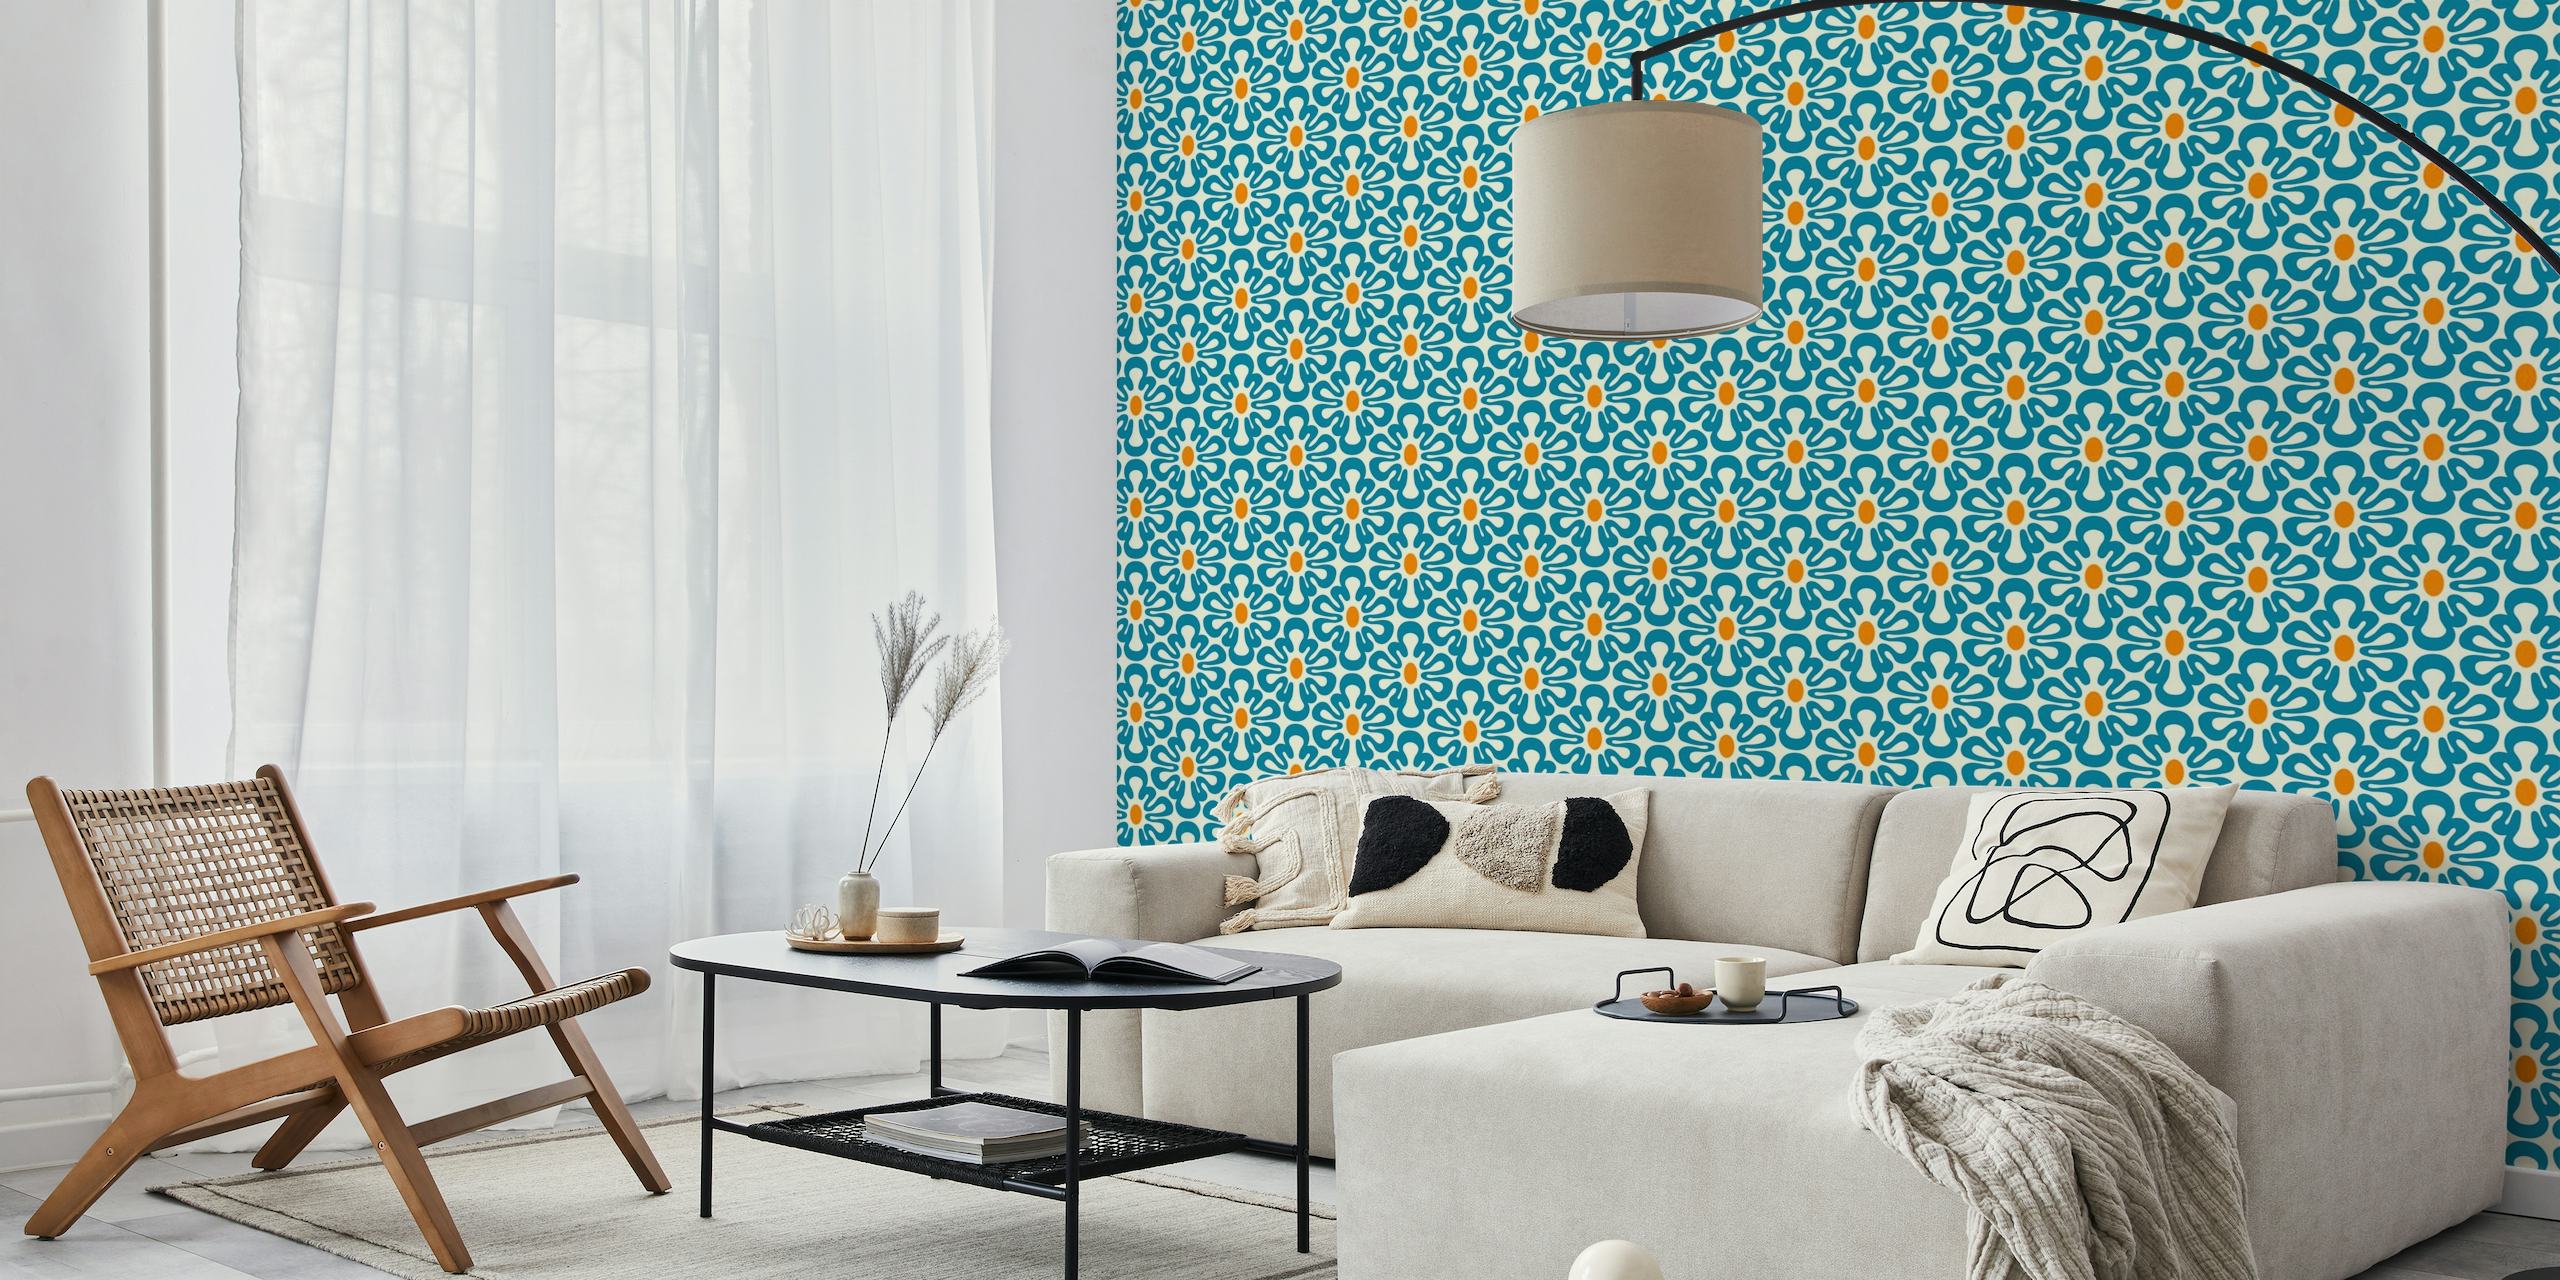 Abstract retro shapes wall mural in blue and yellow